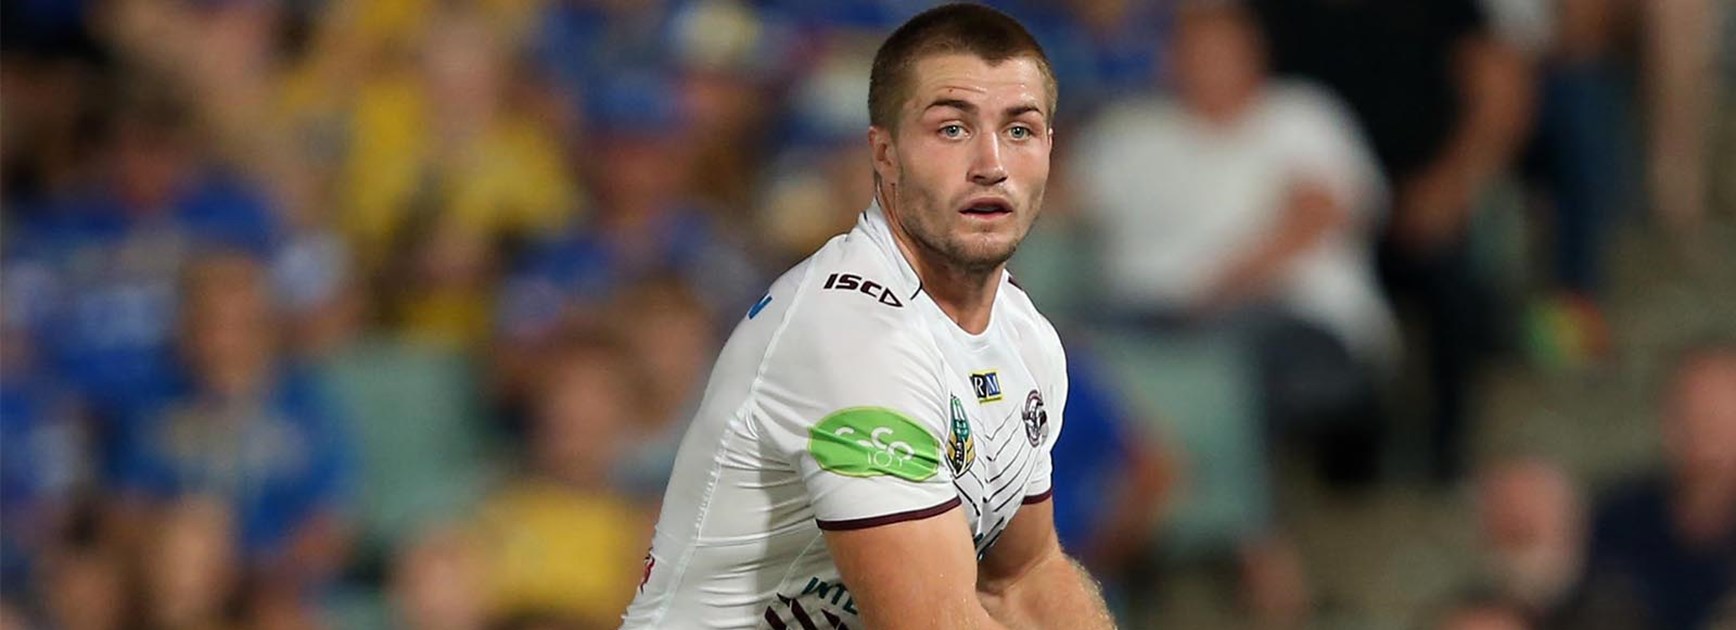 Kieran Foran is back for Manly but will wear the No. 7 jersey.